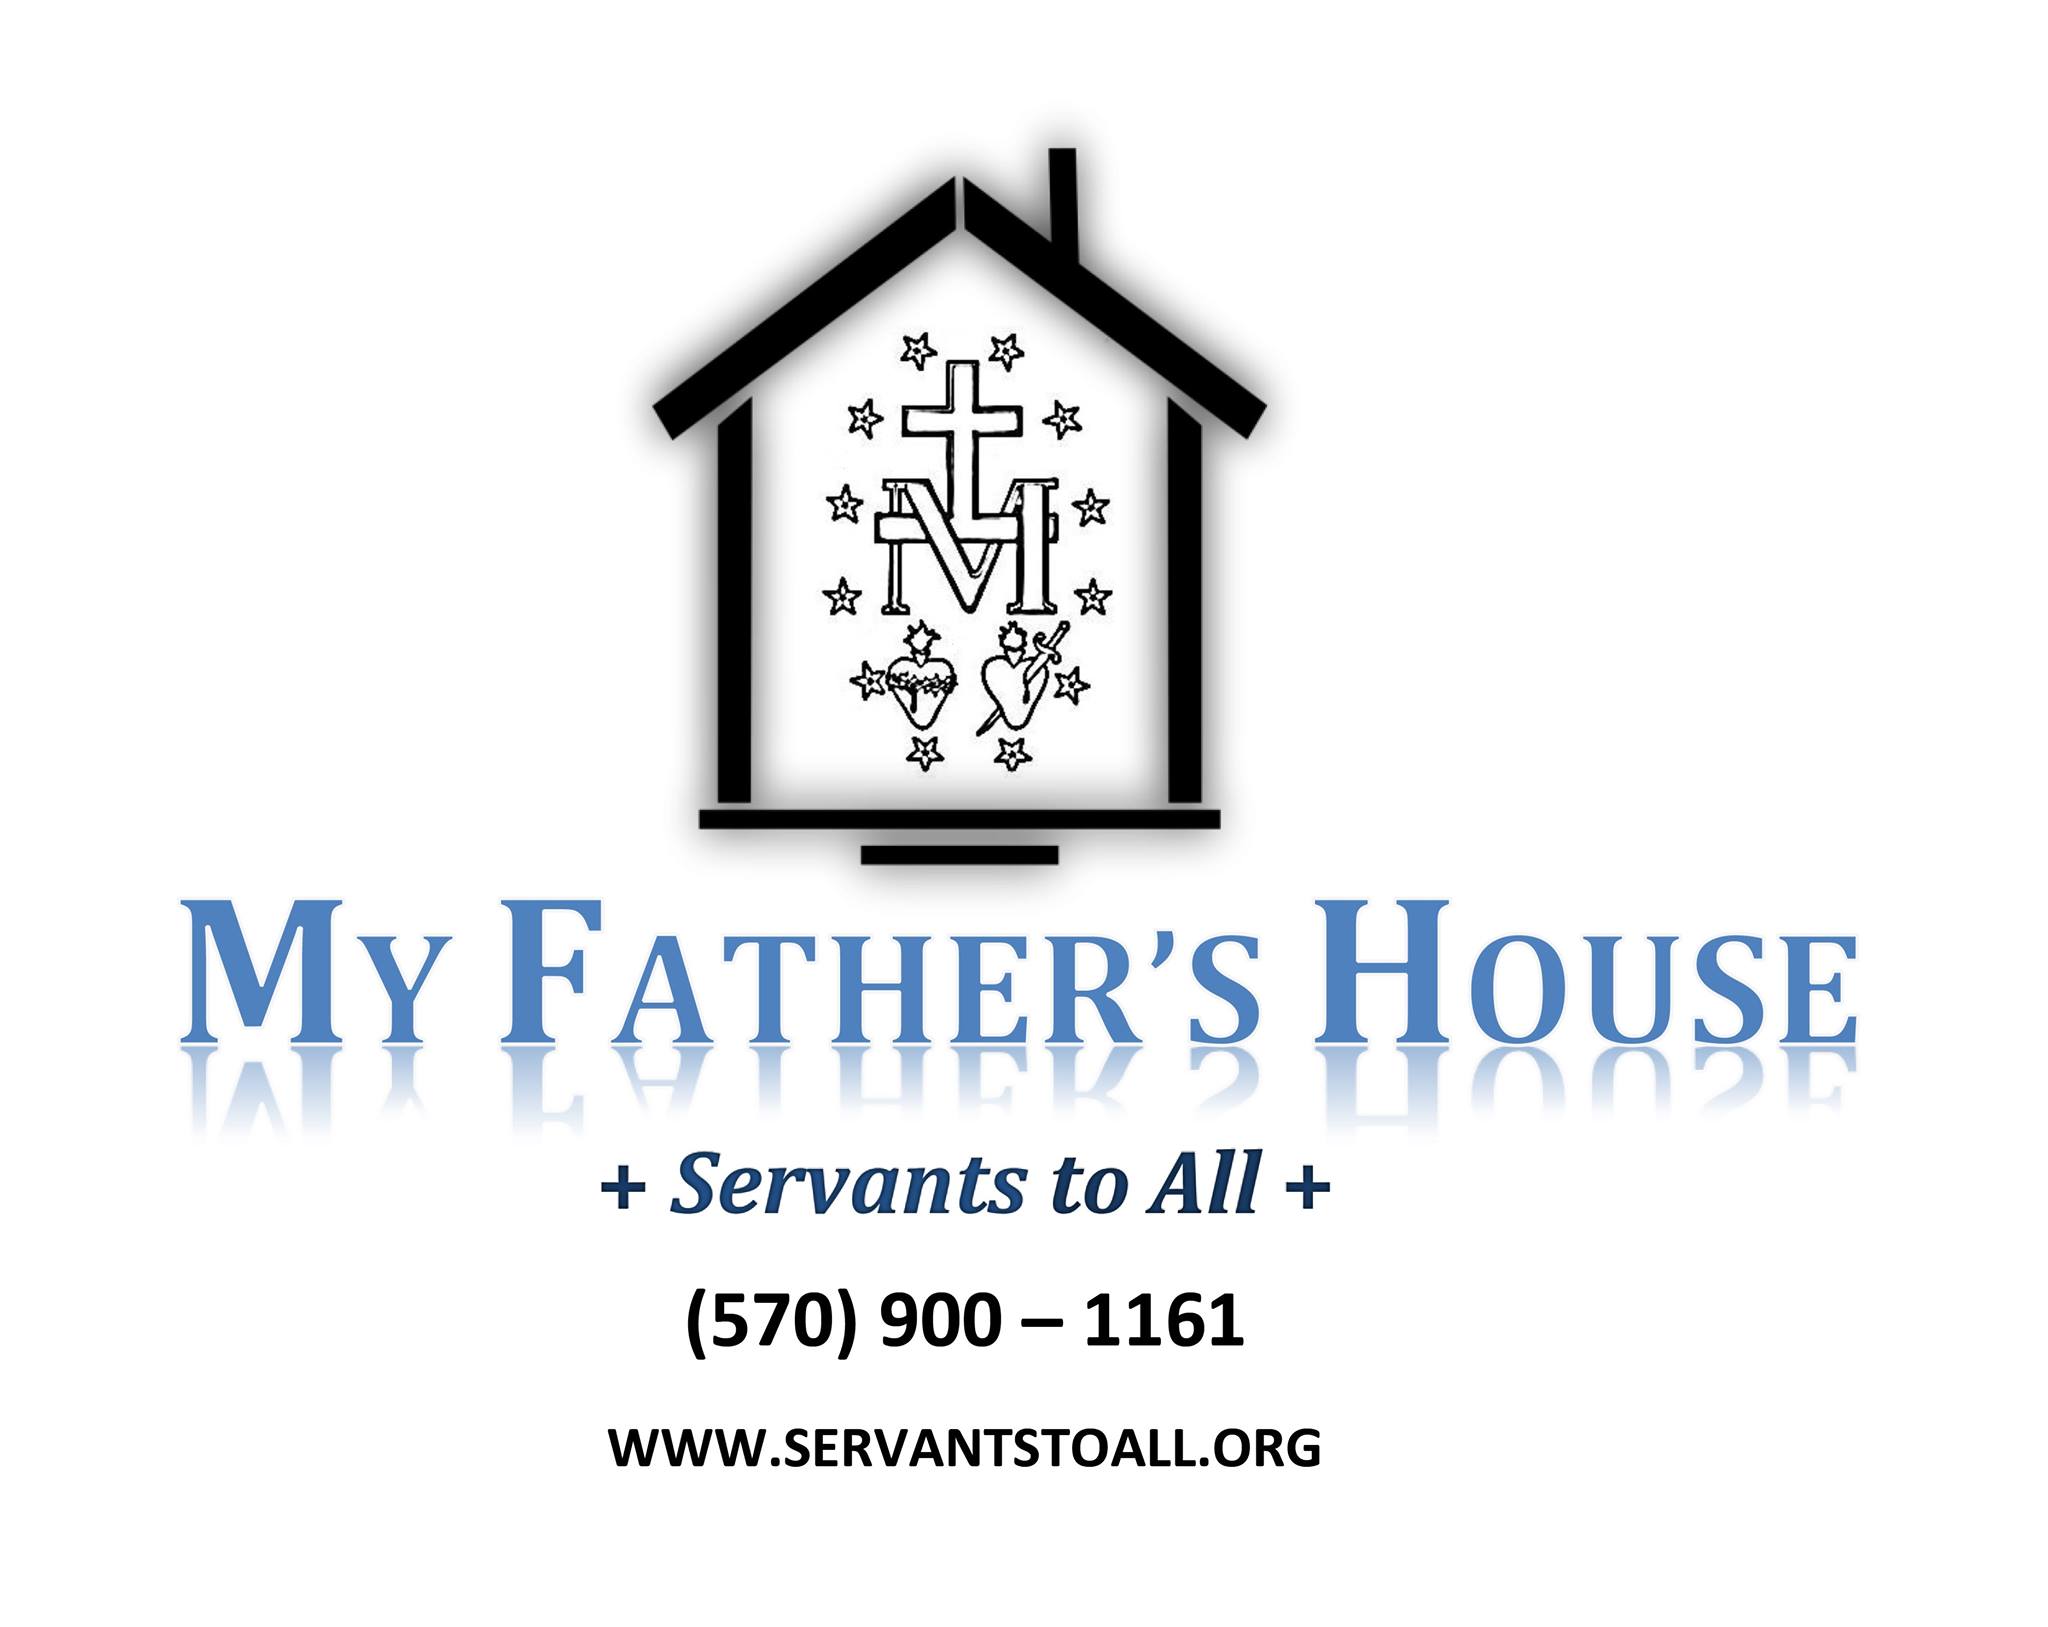 My Father's House - Servants to All